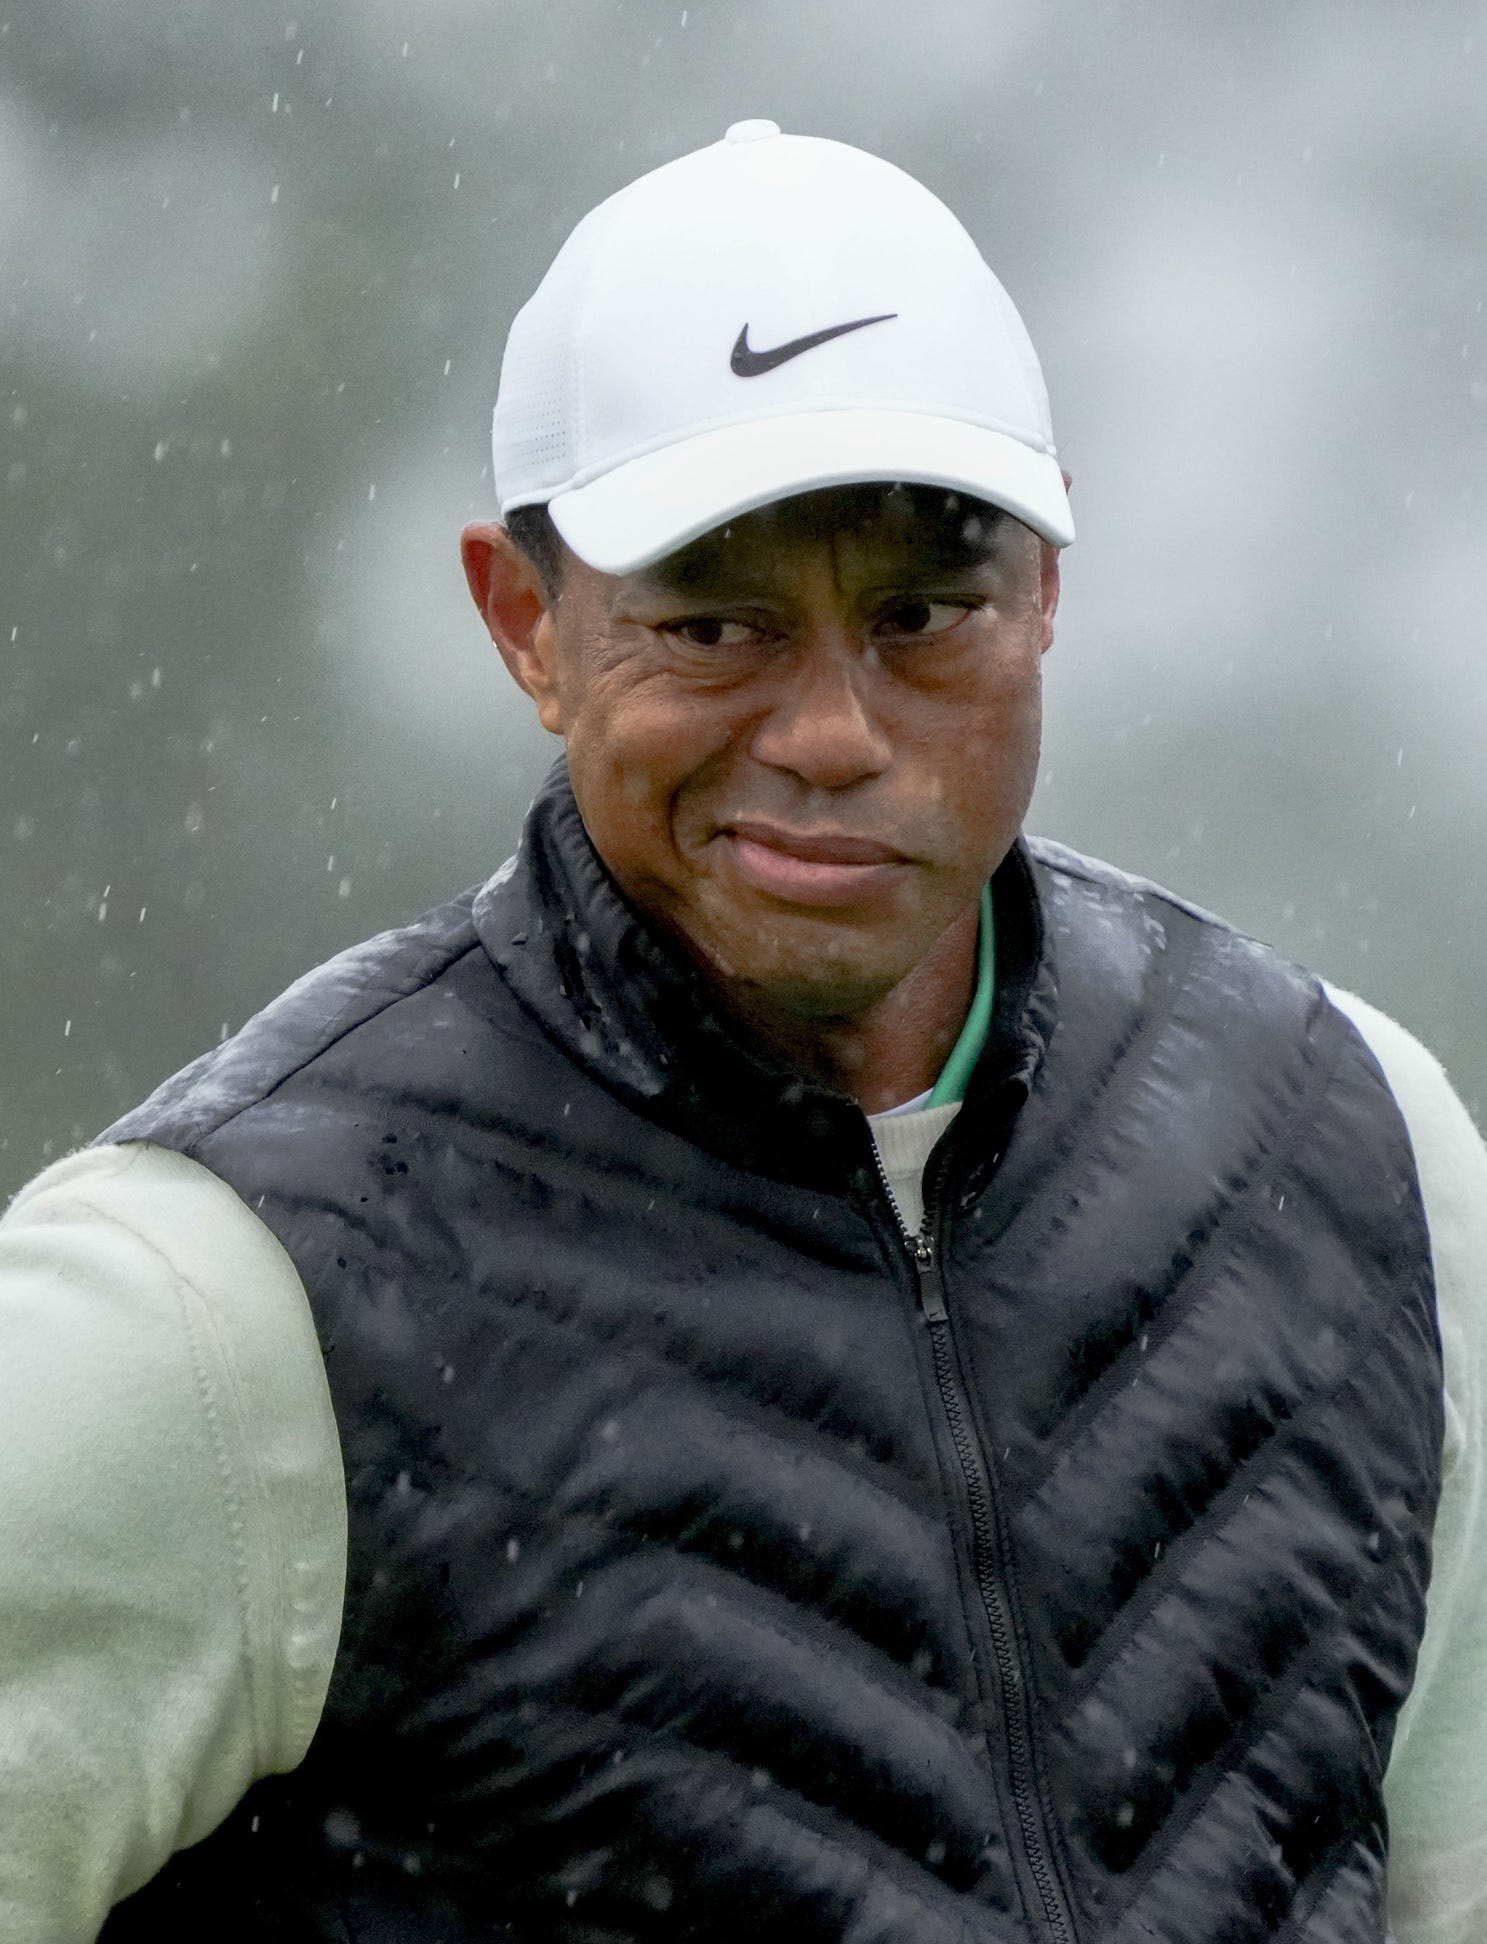 Tiger Woods reacts after putting on the 18th green during the second round of The Masters golf tournament.